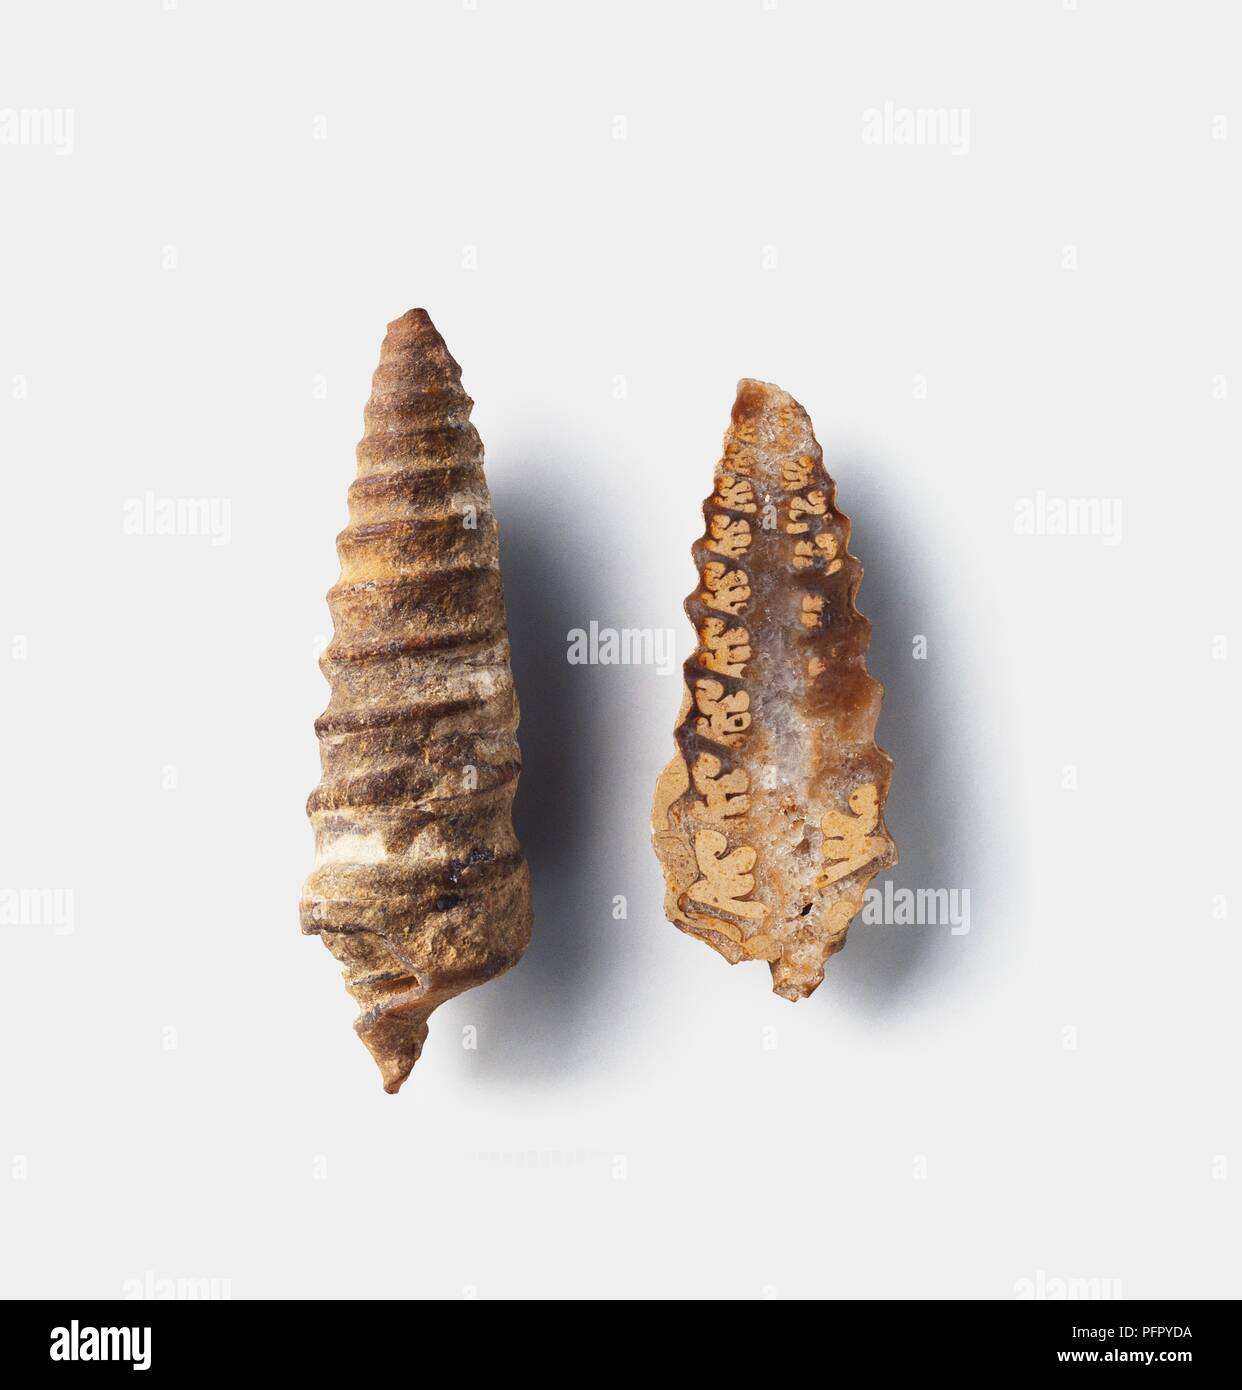 Nerinea (Auger shell), whole shell and cross-section view, Cretaceous era Stock Photo